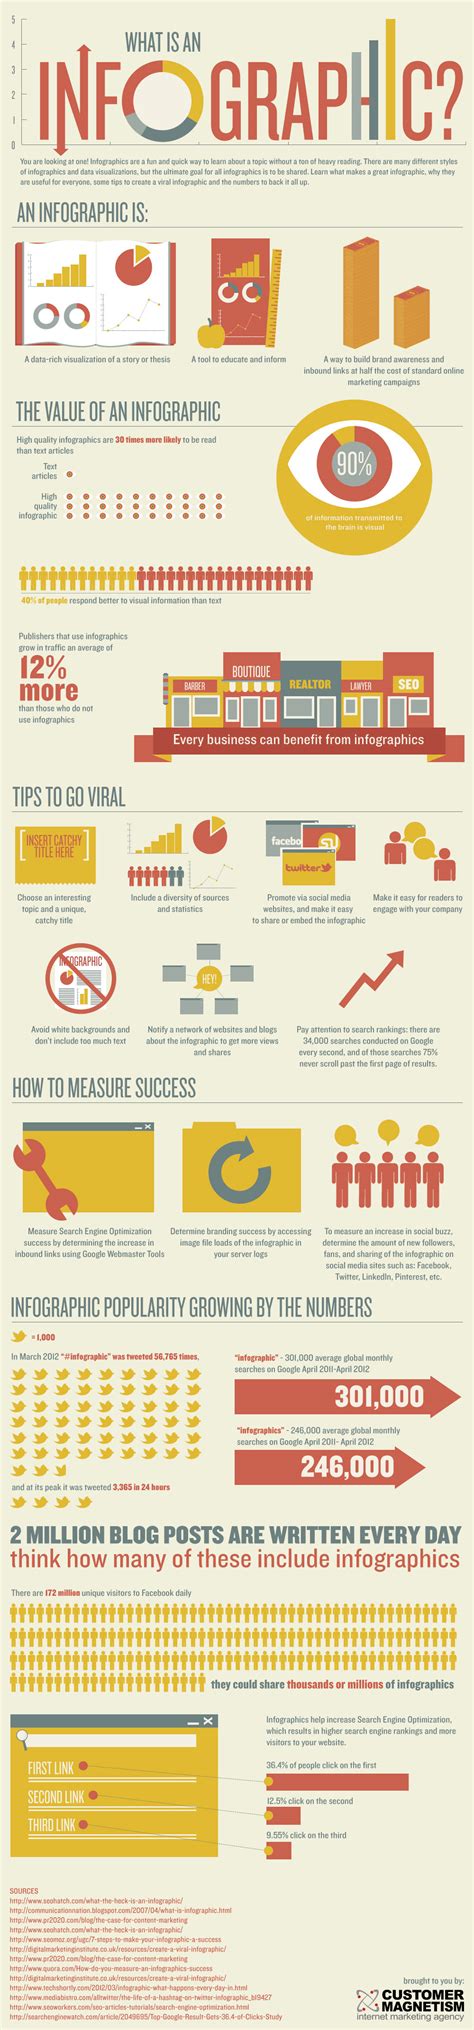 7 Tips To Create Killer Infographics And Attract Traffic To Your Website